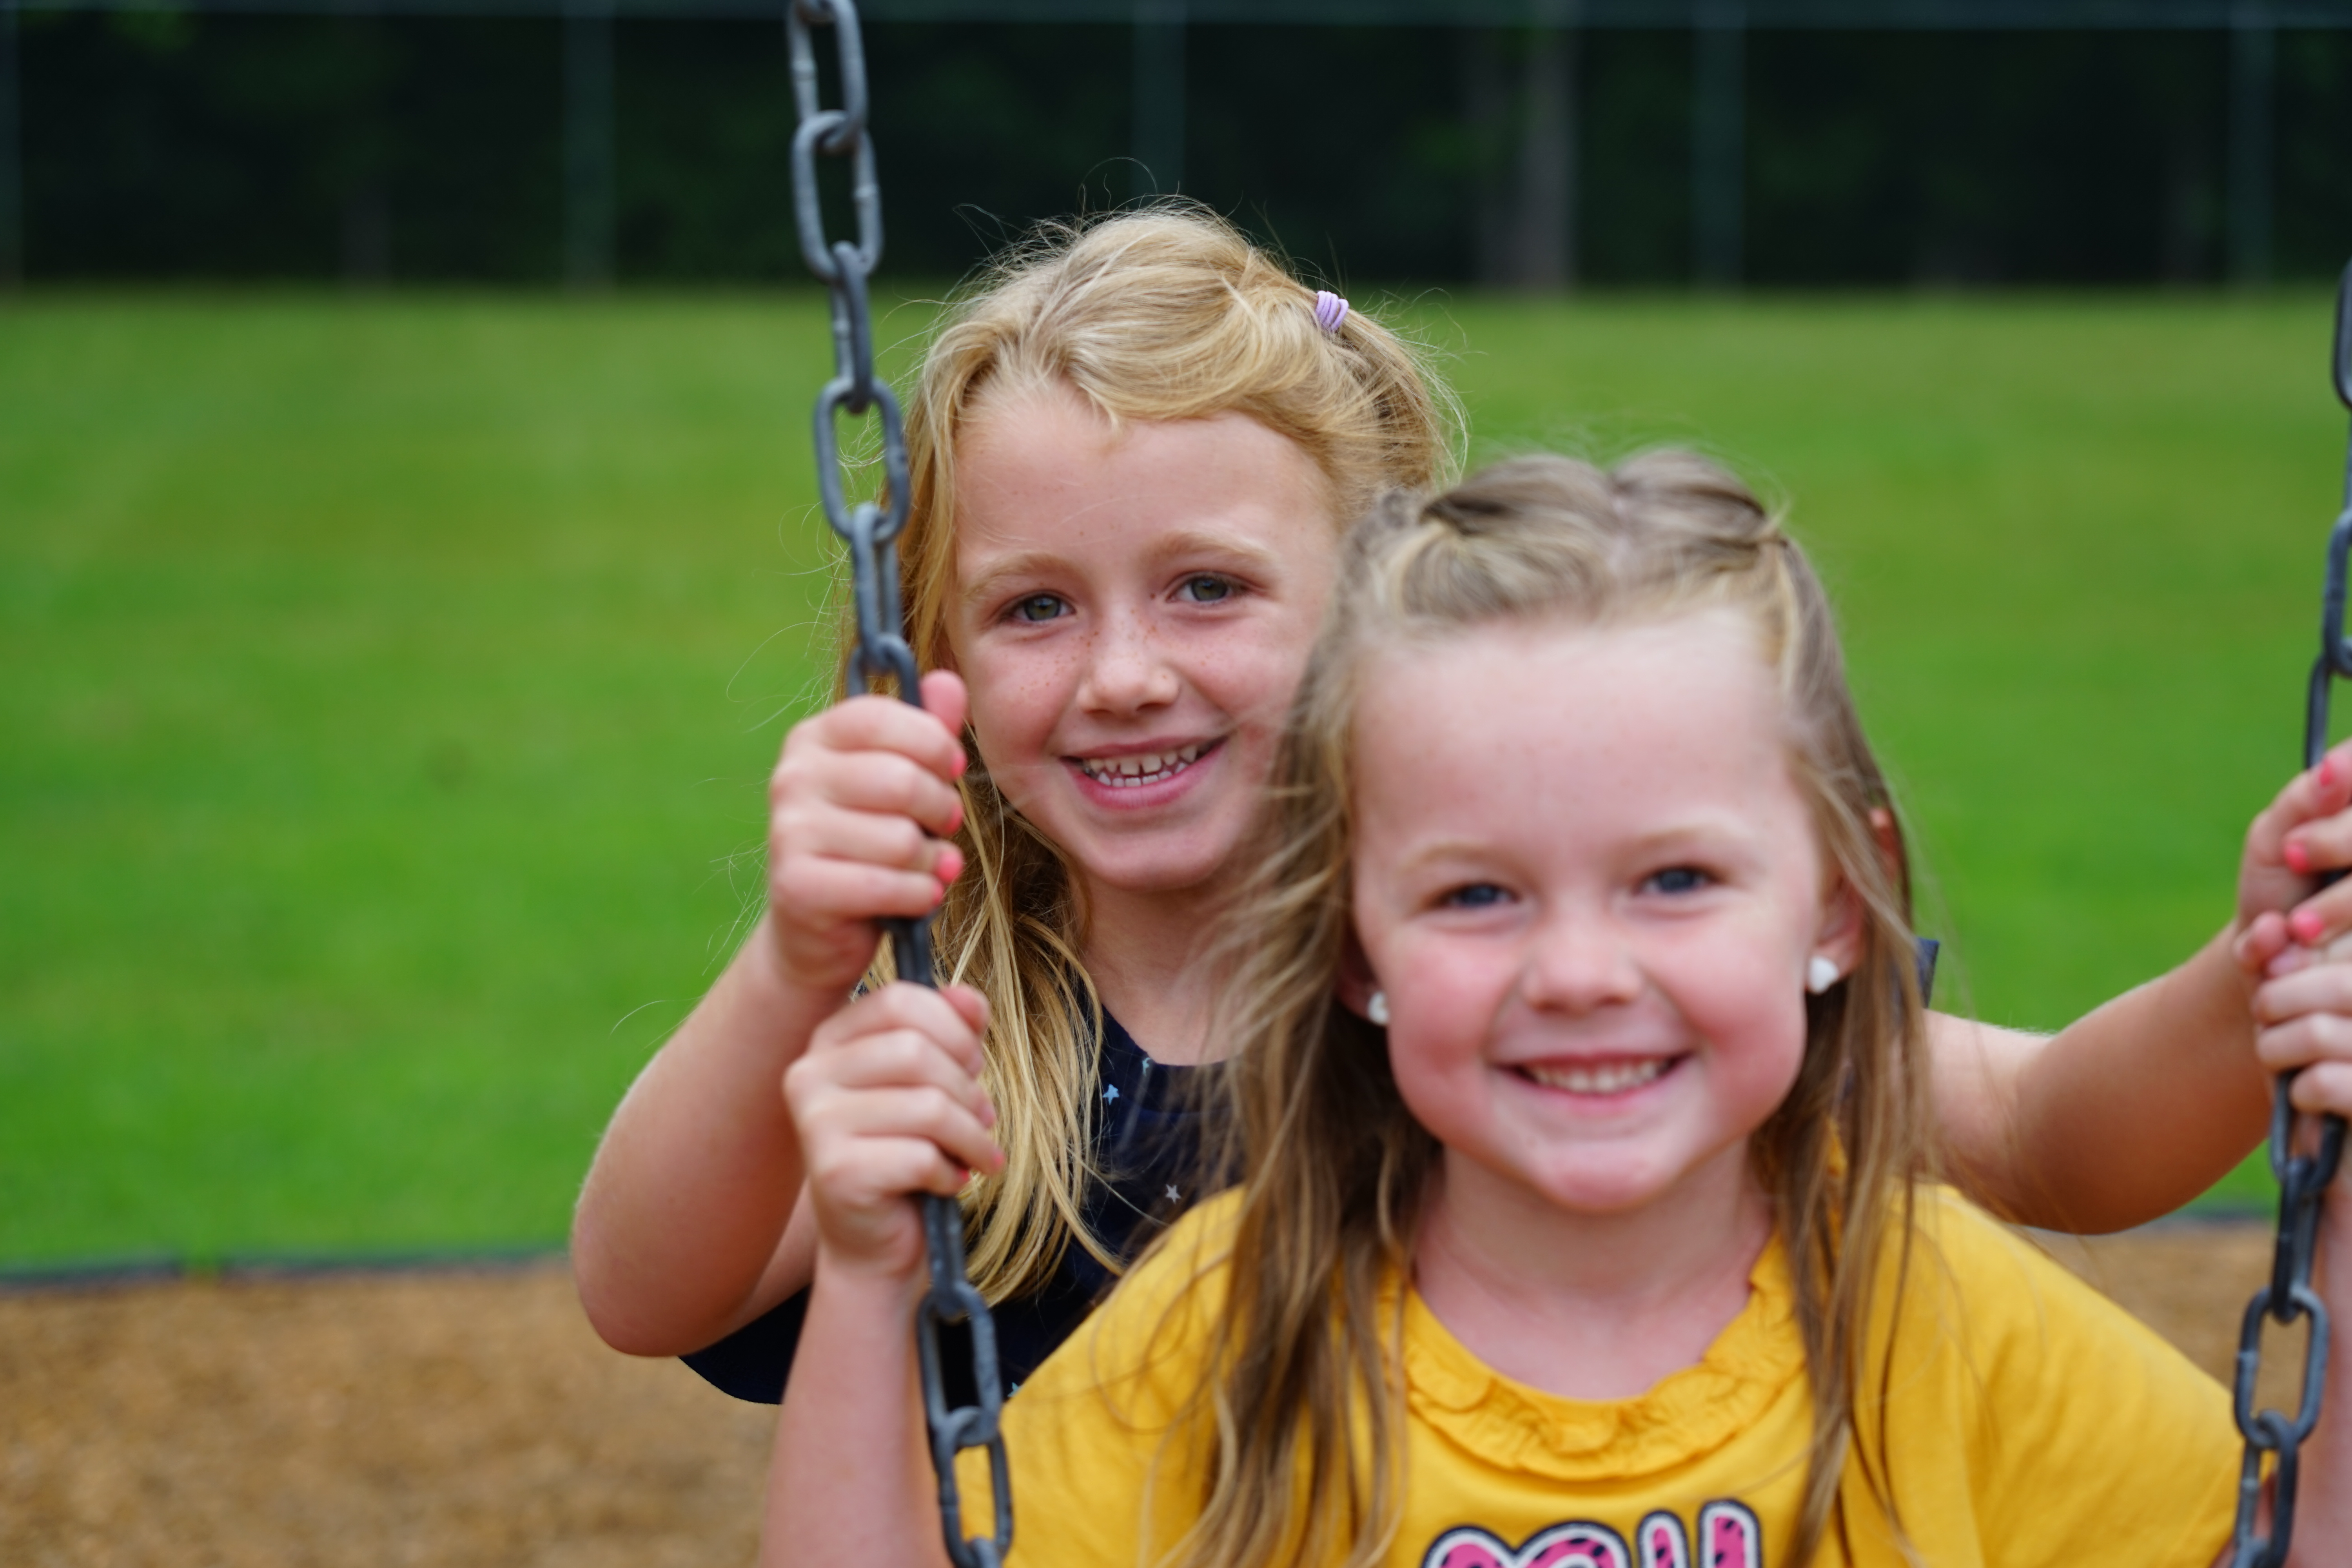 Two girls on swing at recess